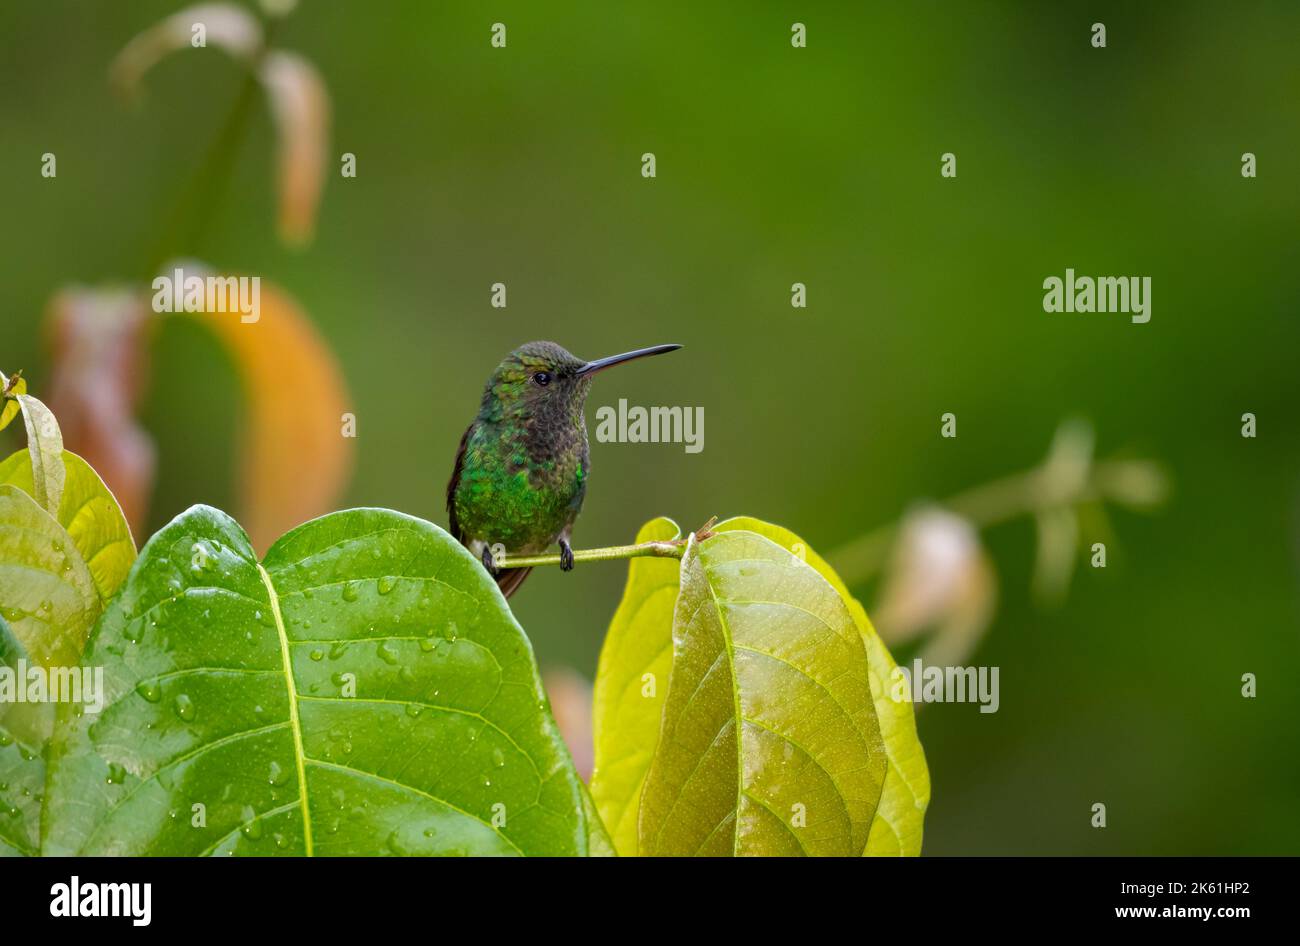 Cute green hummingbird, perched on a branch with leaves drying off after rain Stock Photo